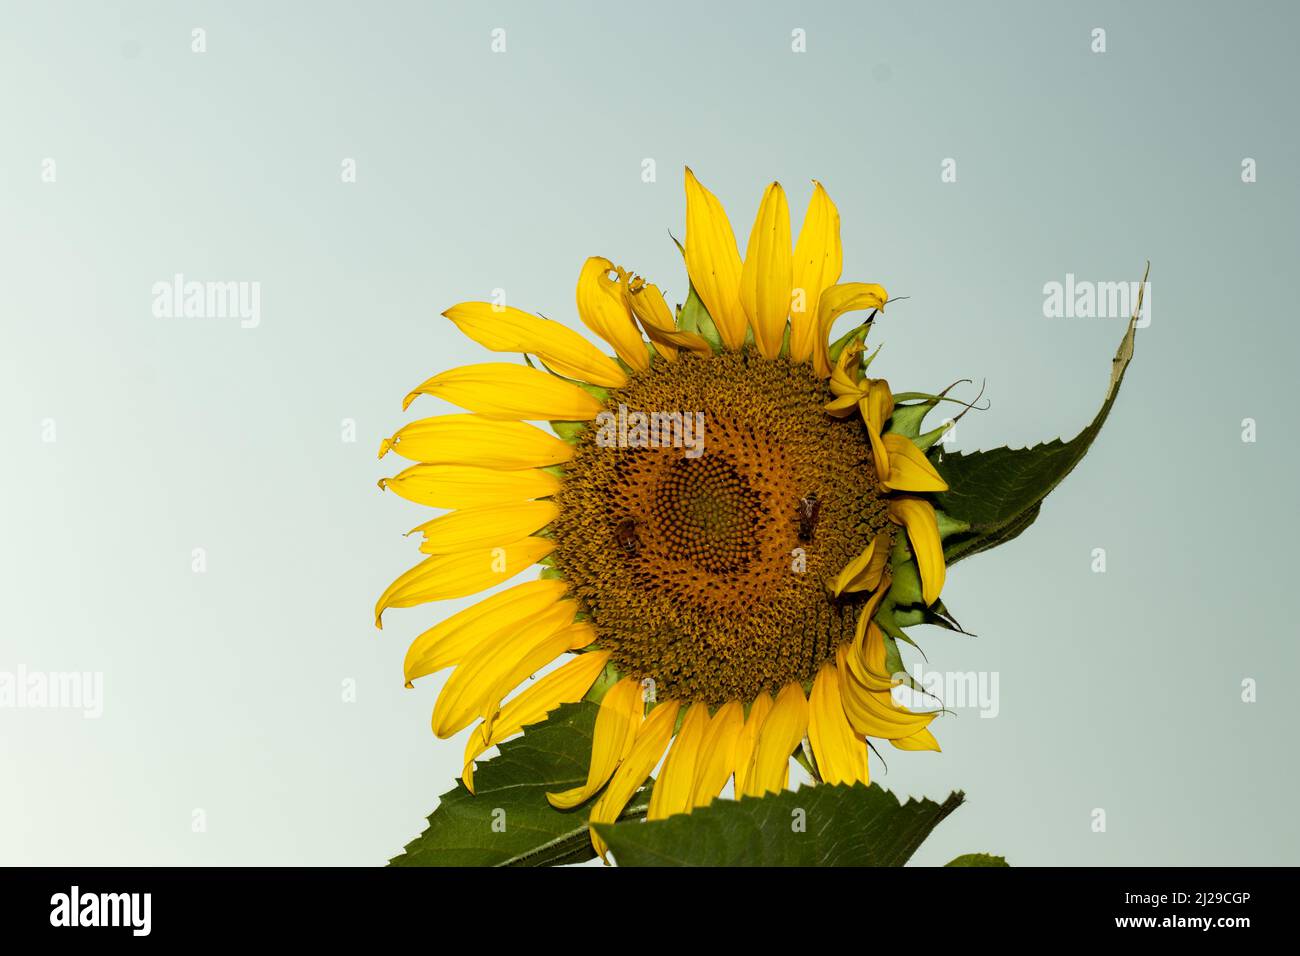 Helianthus annuus or sunflower is a large daisy-like flower face Stock Photo